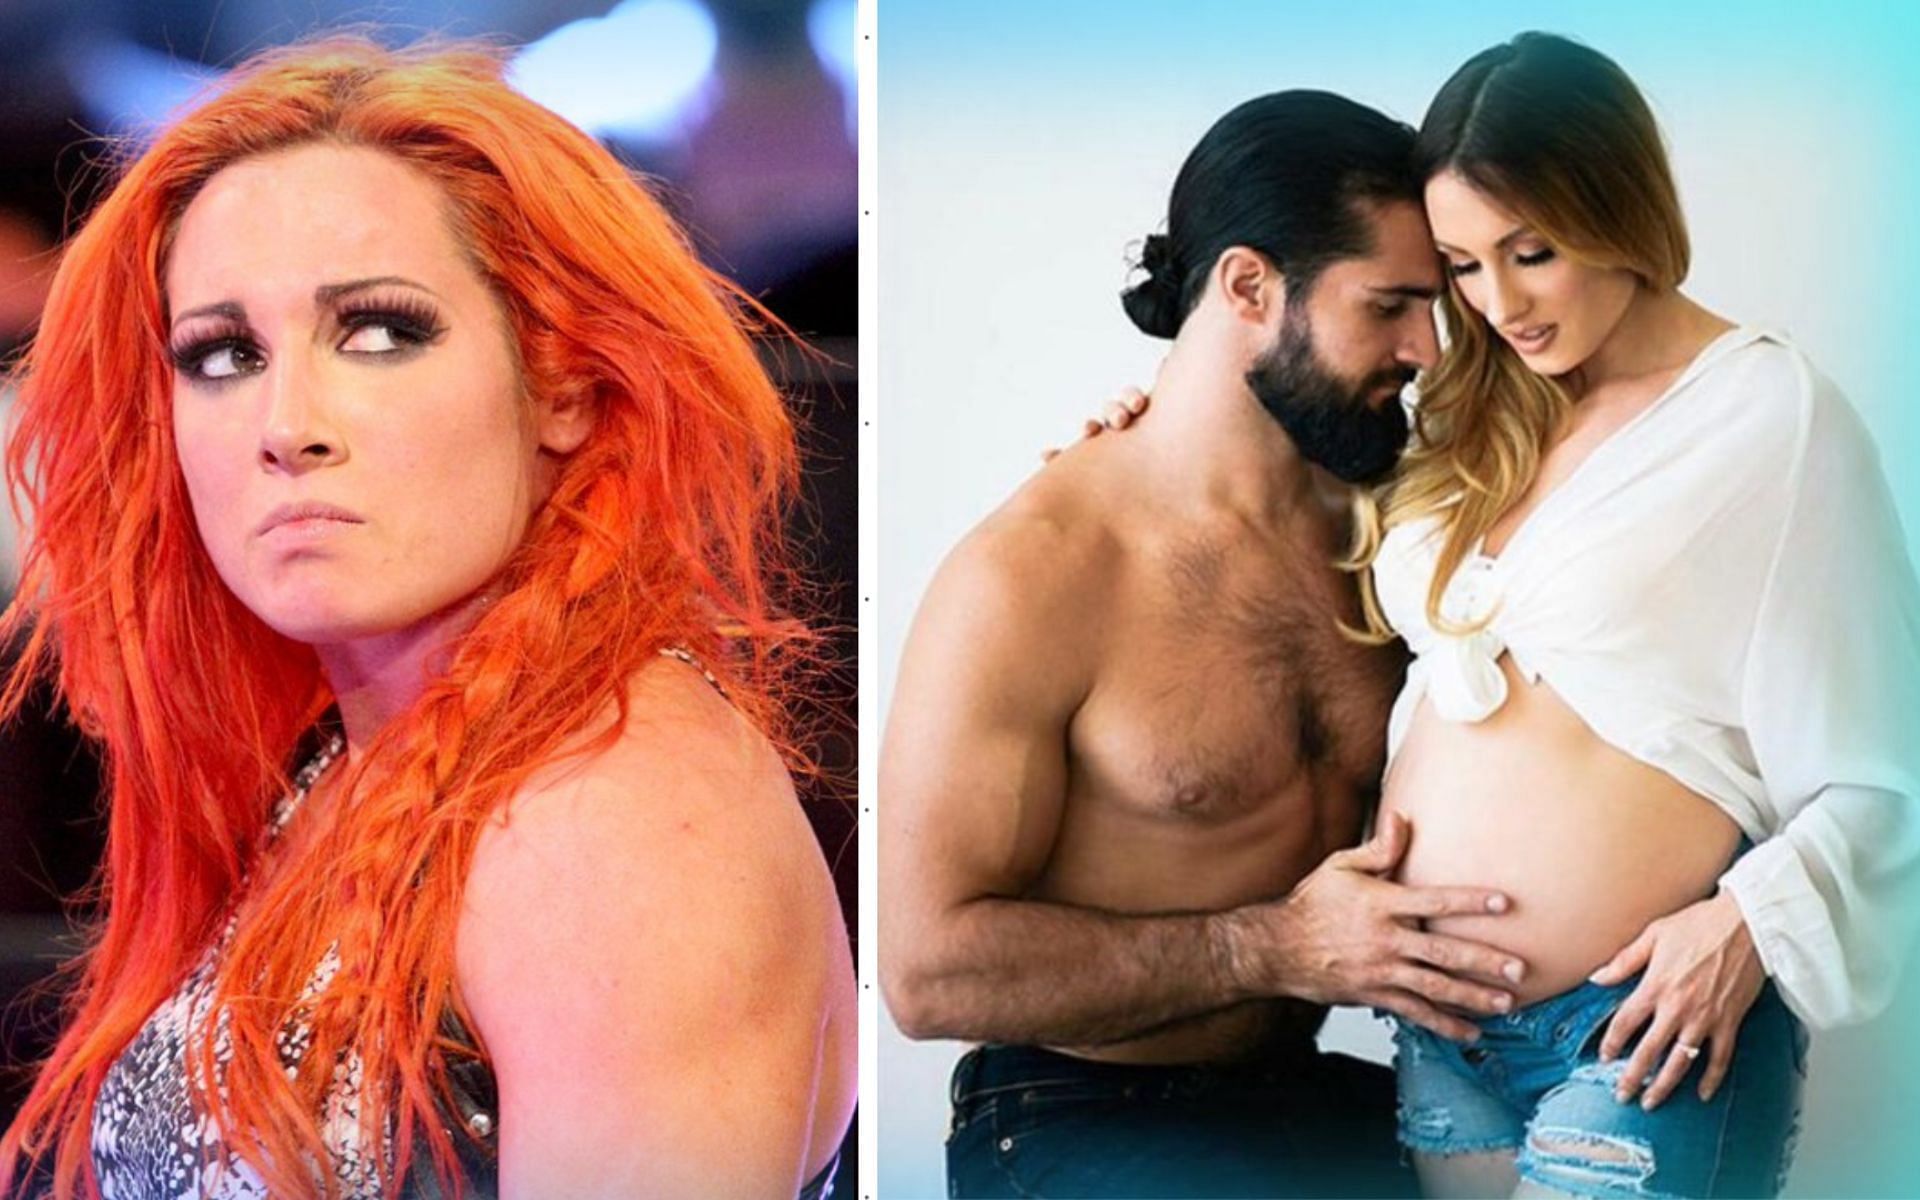 WWE Superstars, Becky Lynch and Seth Rollins